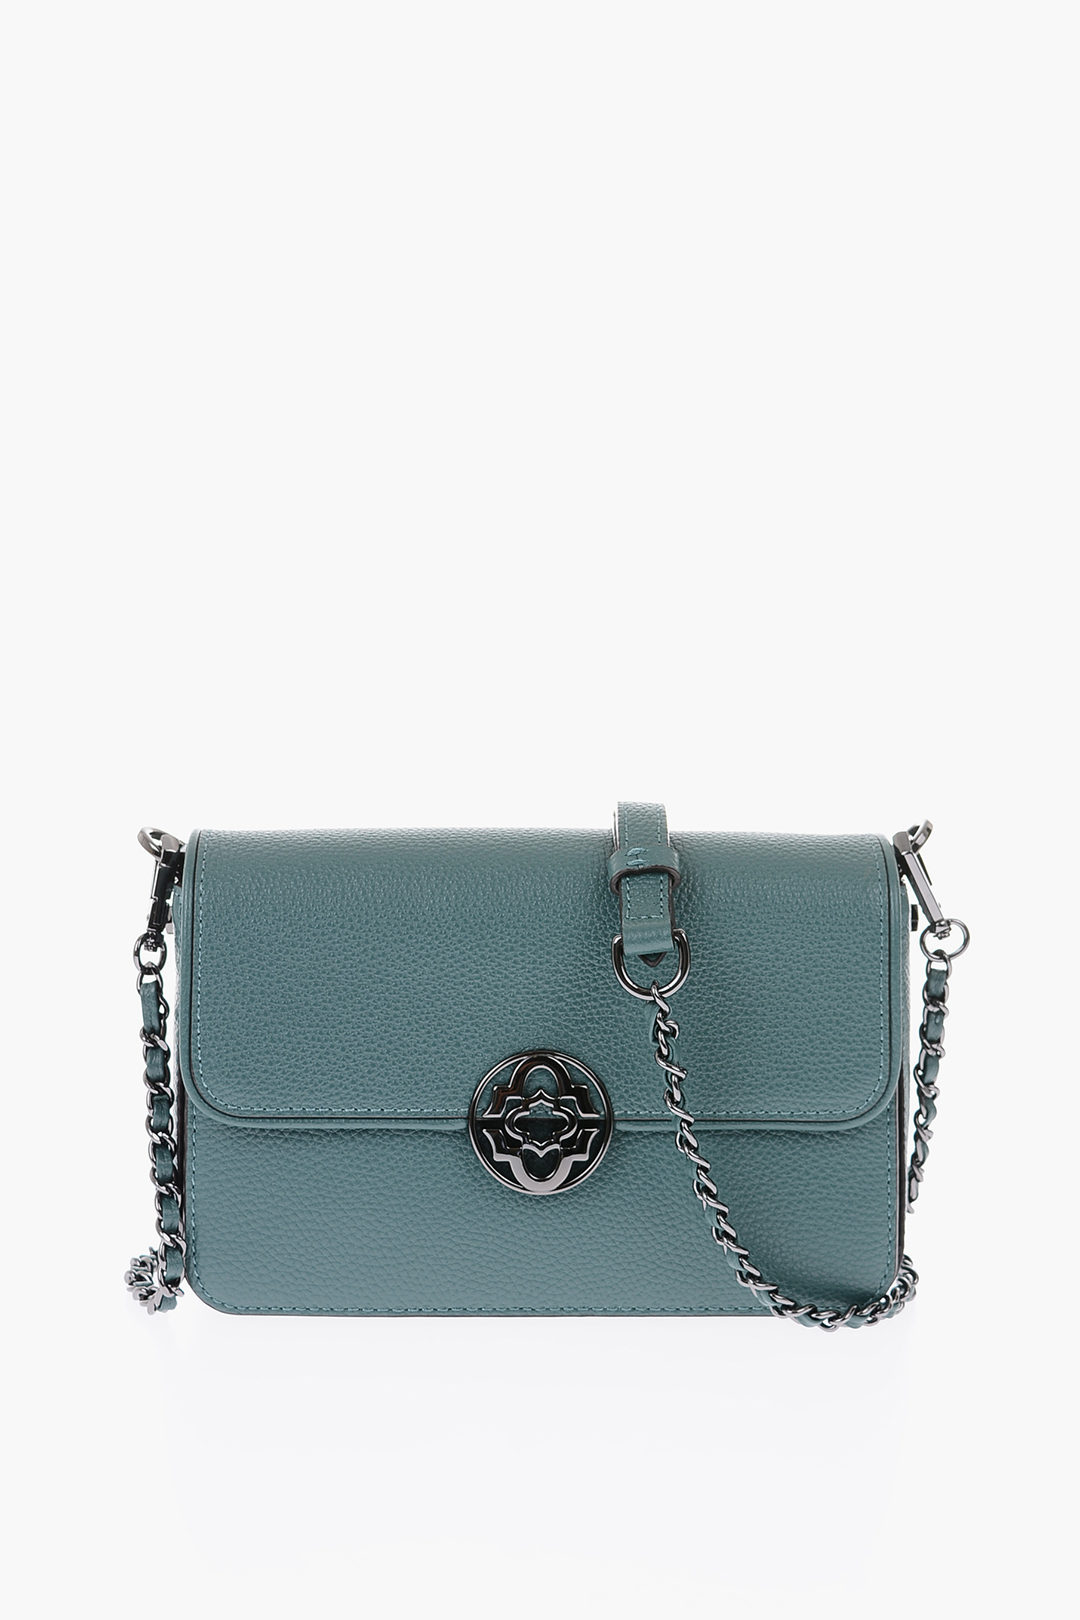 OrYANY textured leather GERRARD crossbody bag with removable shoulder ...